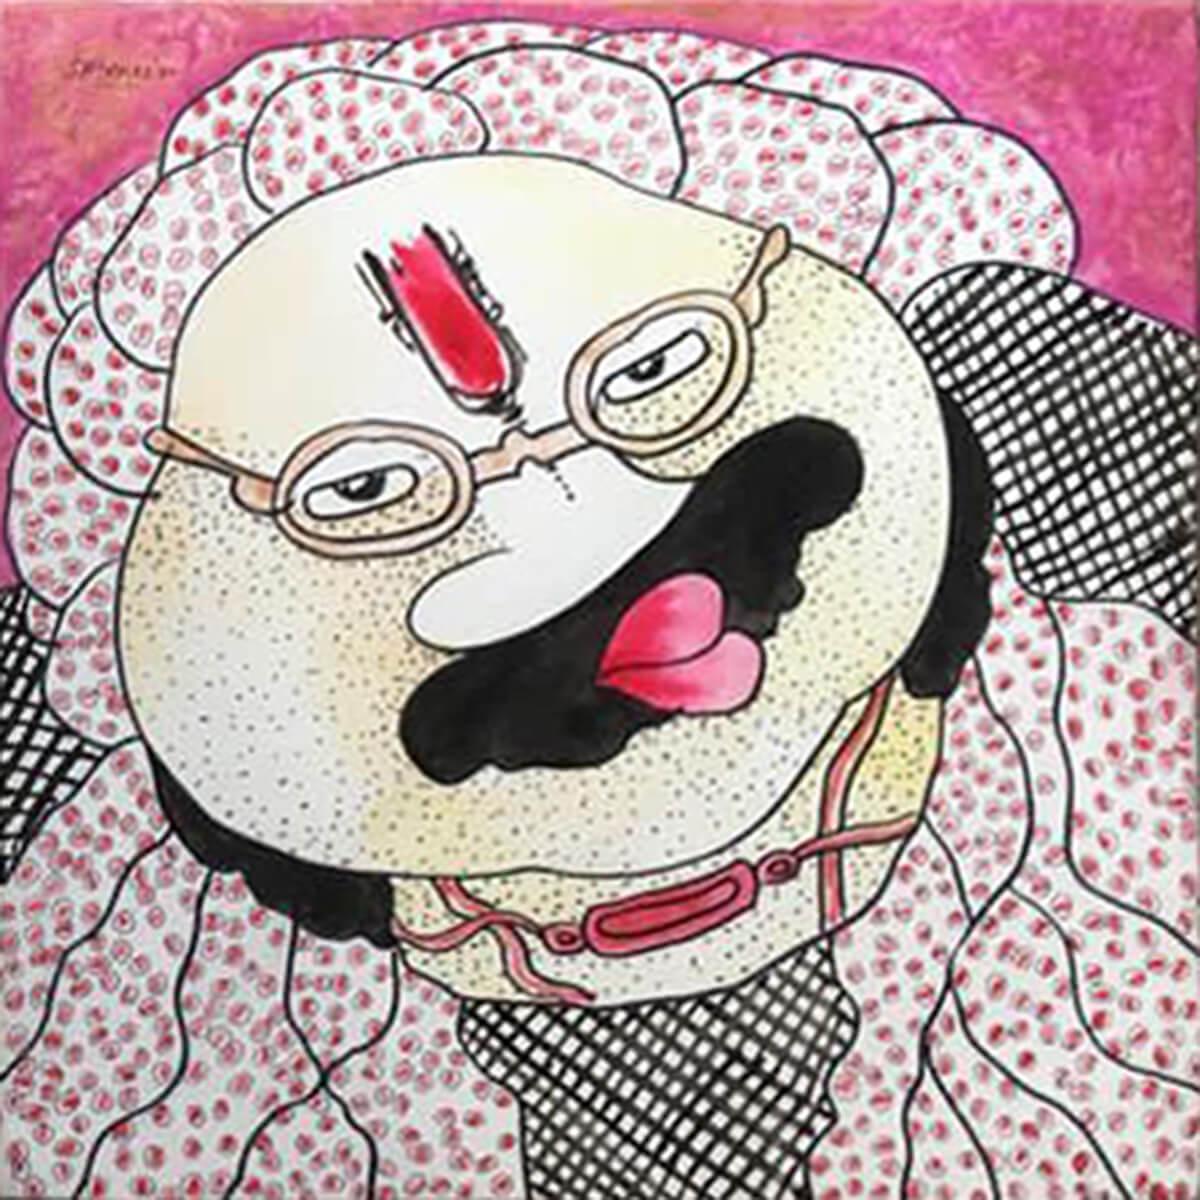 Shyamal Mukherjee  -  Bawa Biwi -  12 x 12 inches (unframed size)   
Acrylic on Canvas, 2021 (Set of 2)

About the Artist :

Mukherjee was born in 1961, and spent all of his college years in Santiniketan, first completing his BFA in 1987, and then